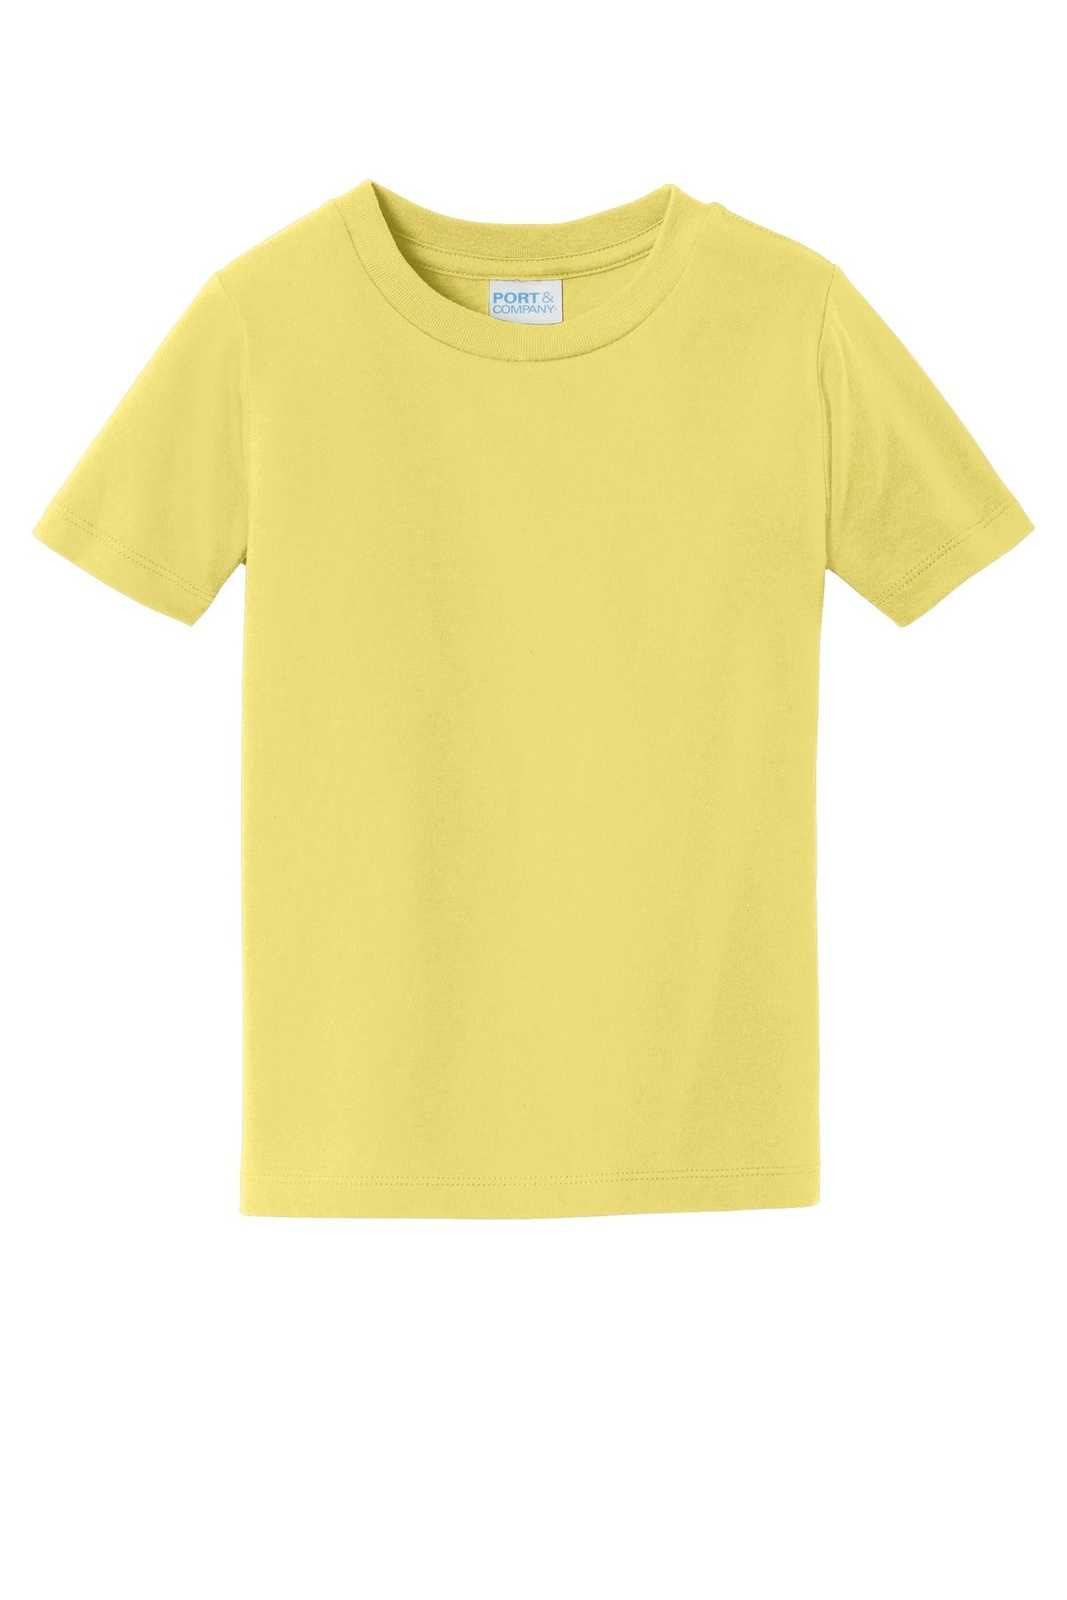 Port & Company PC450TD Toddler Fan Favorite Tee - Yellow - HIT a Double - 1